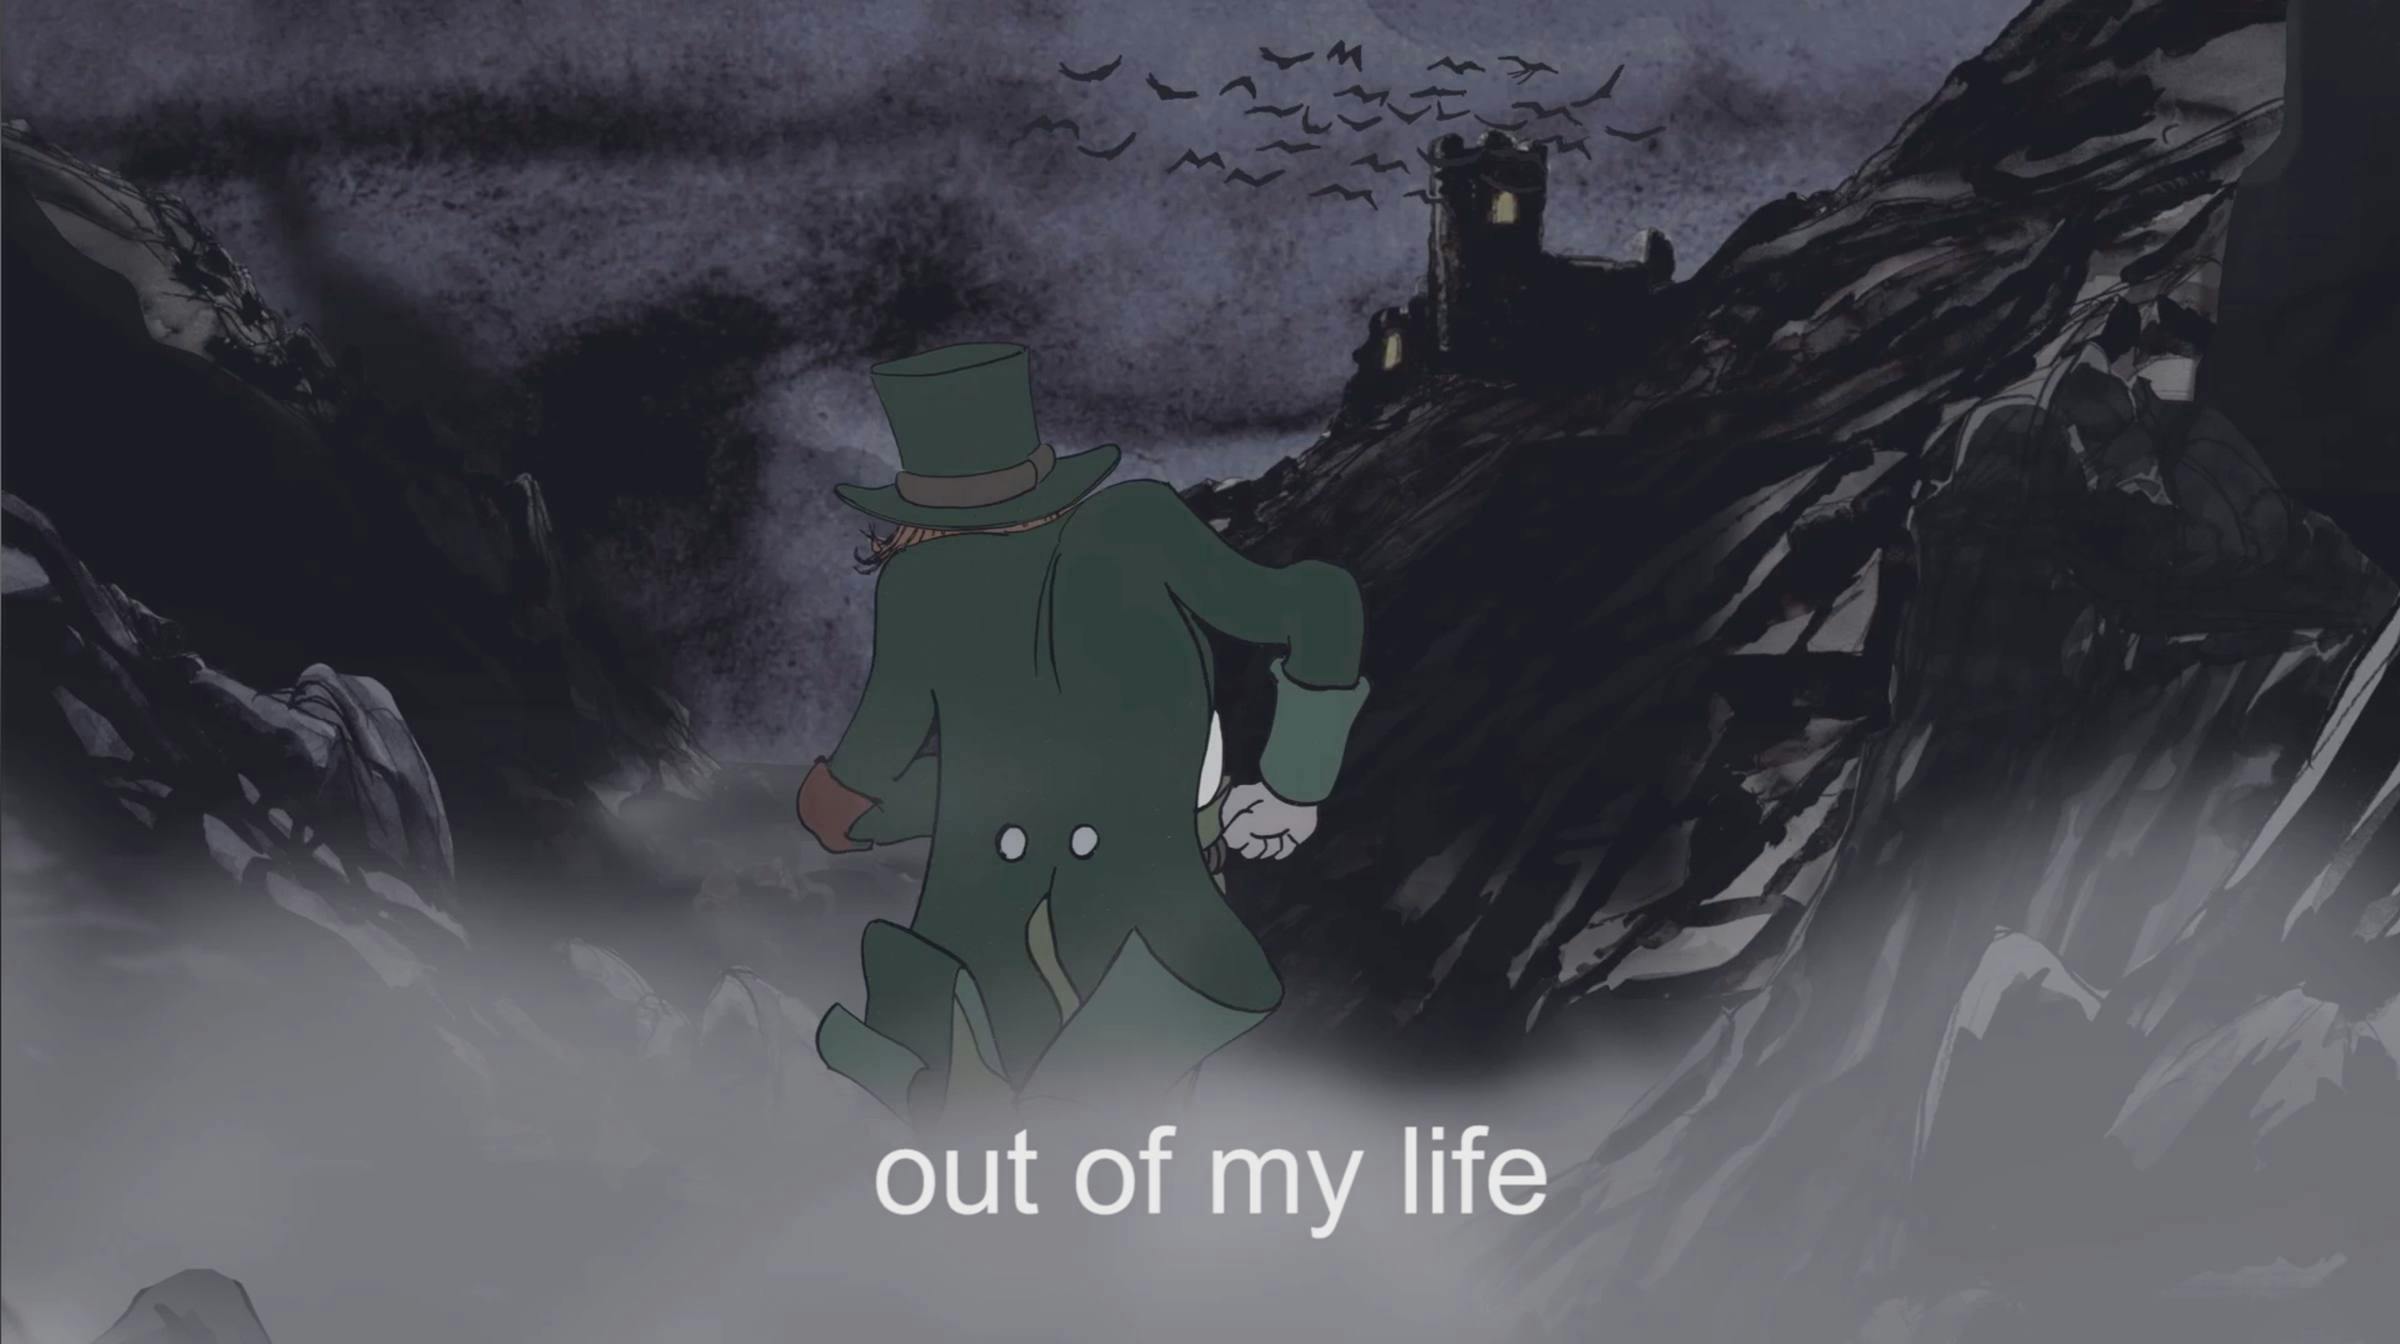 A comic-style image of a person wearing a green coat and top hat looking into the distance through a valley to a darkened building. The words 'out of my life' are superimposed on top.